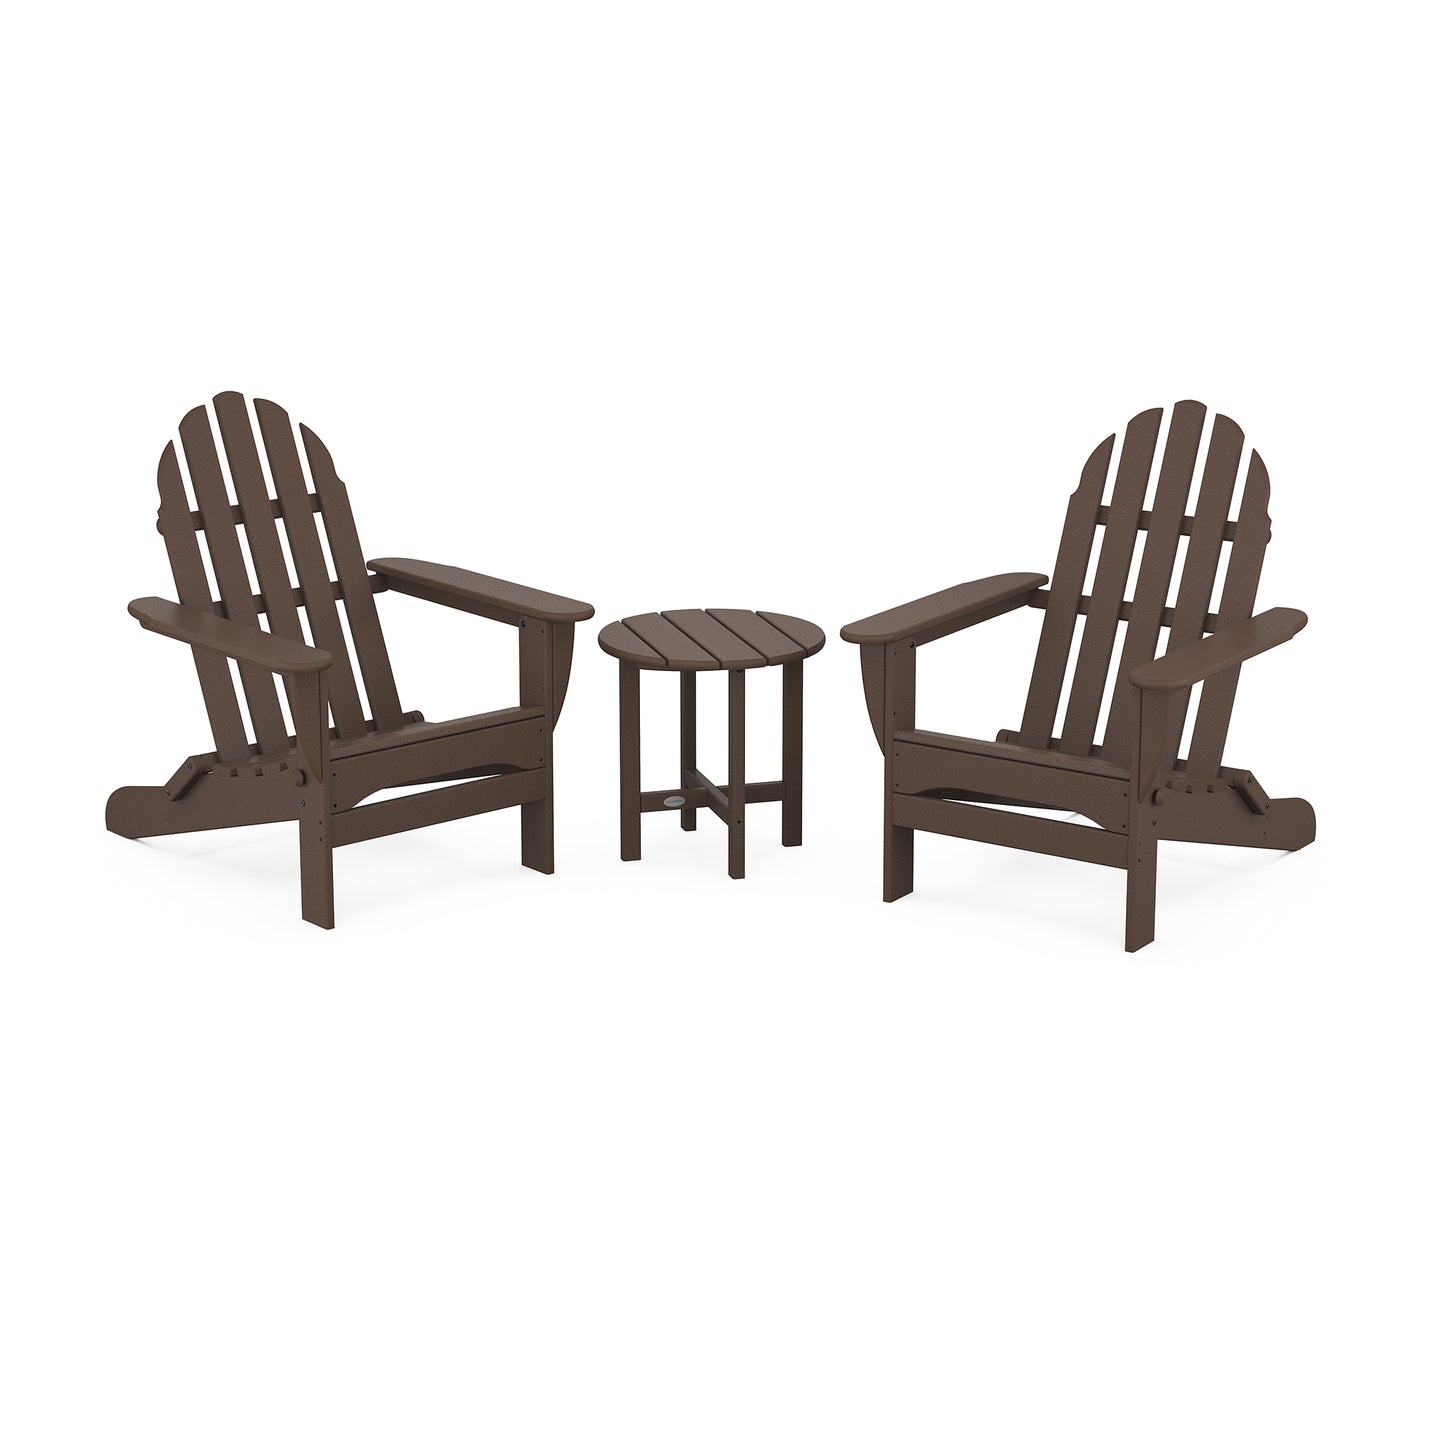 Two brown POLYWOOD Classic Folding Adirondack chairs facing each other, with a small round table between them, set against a plain white background, demonstrating outdoor durability.